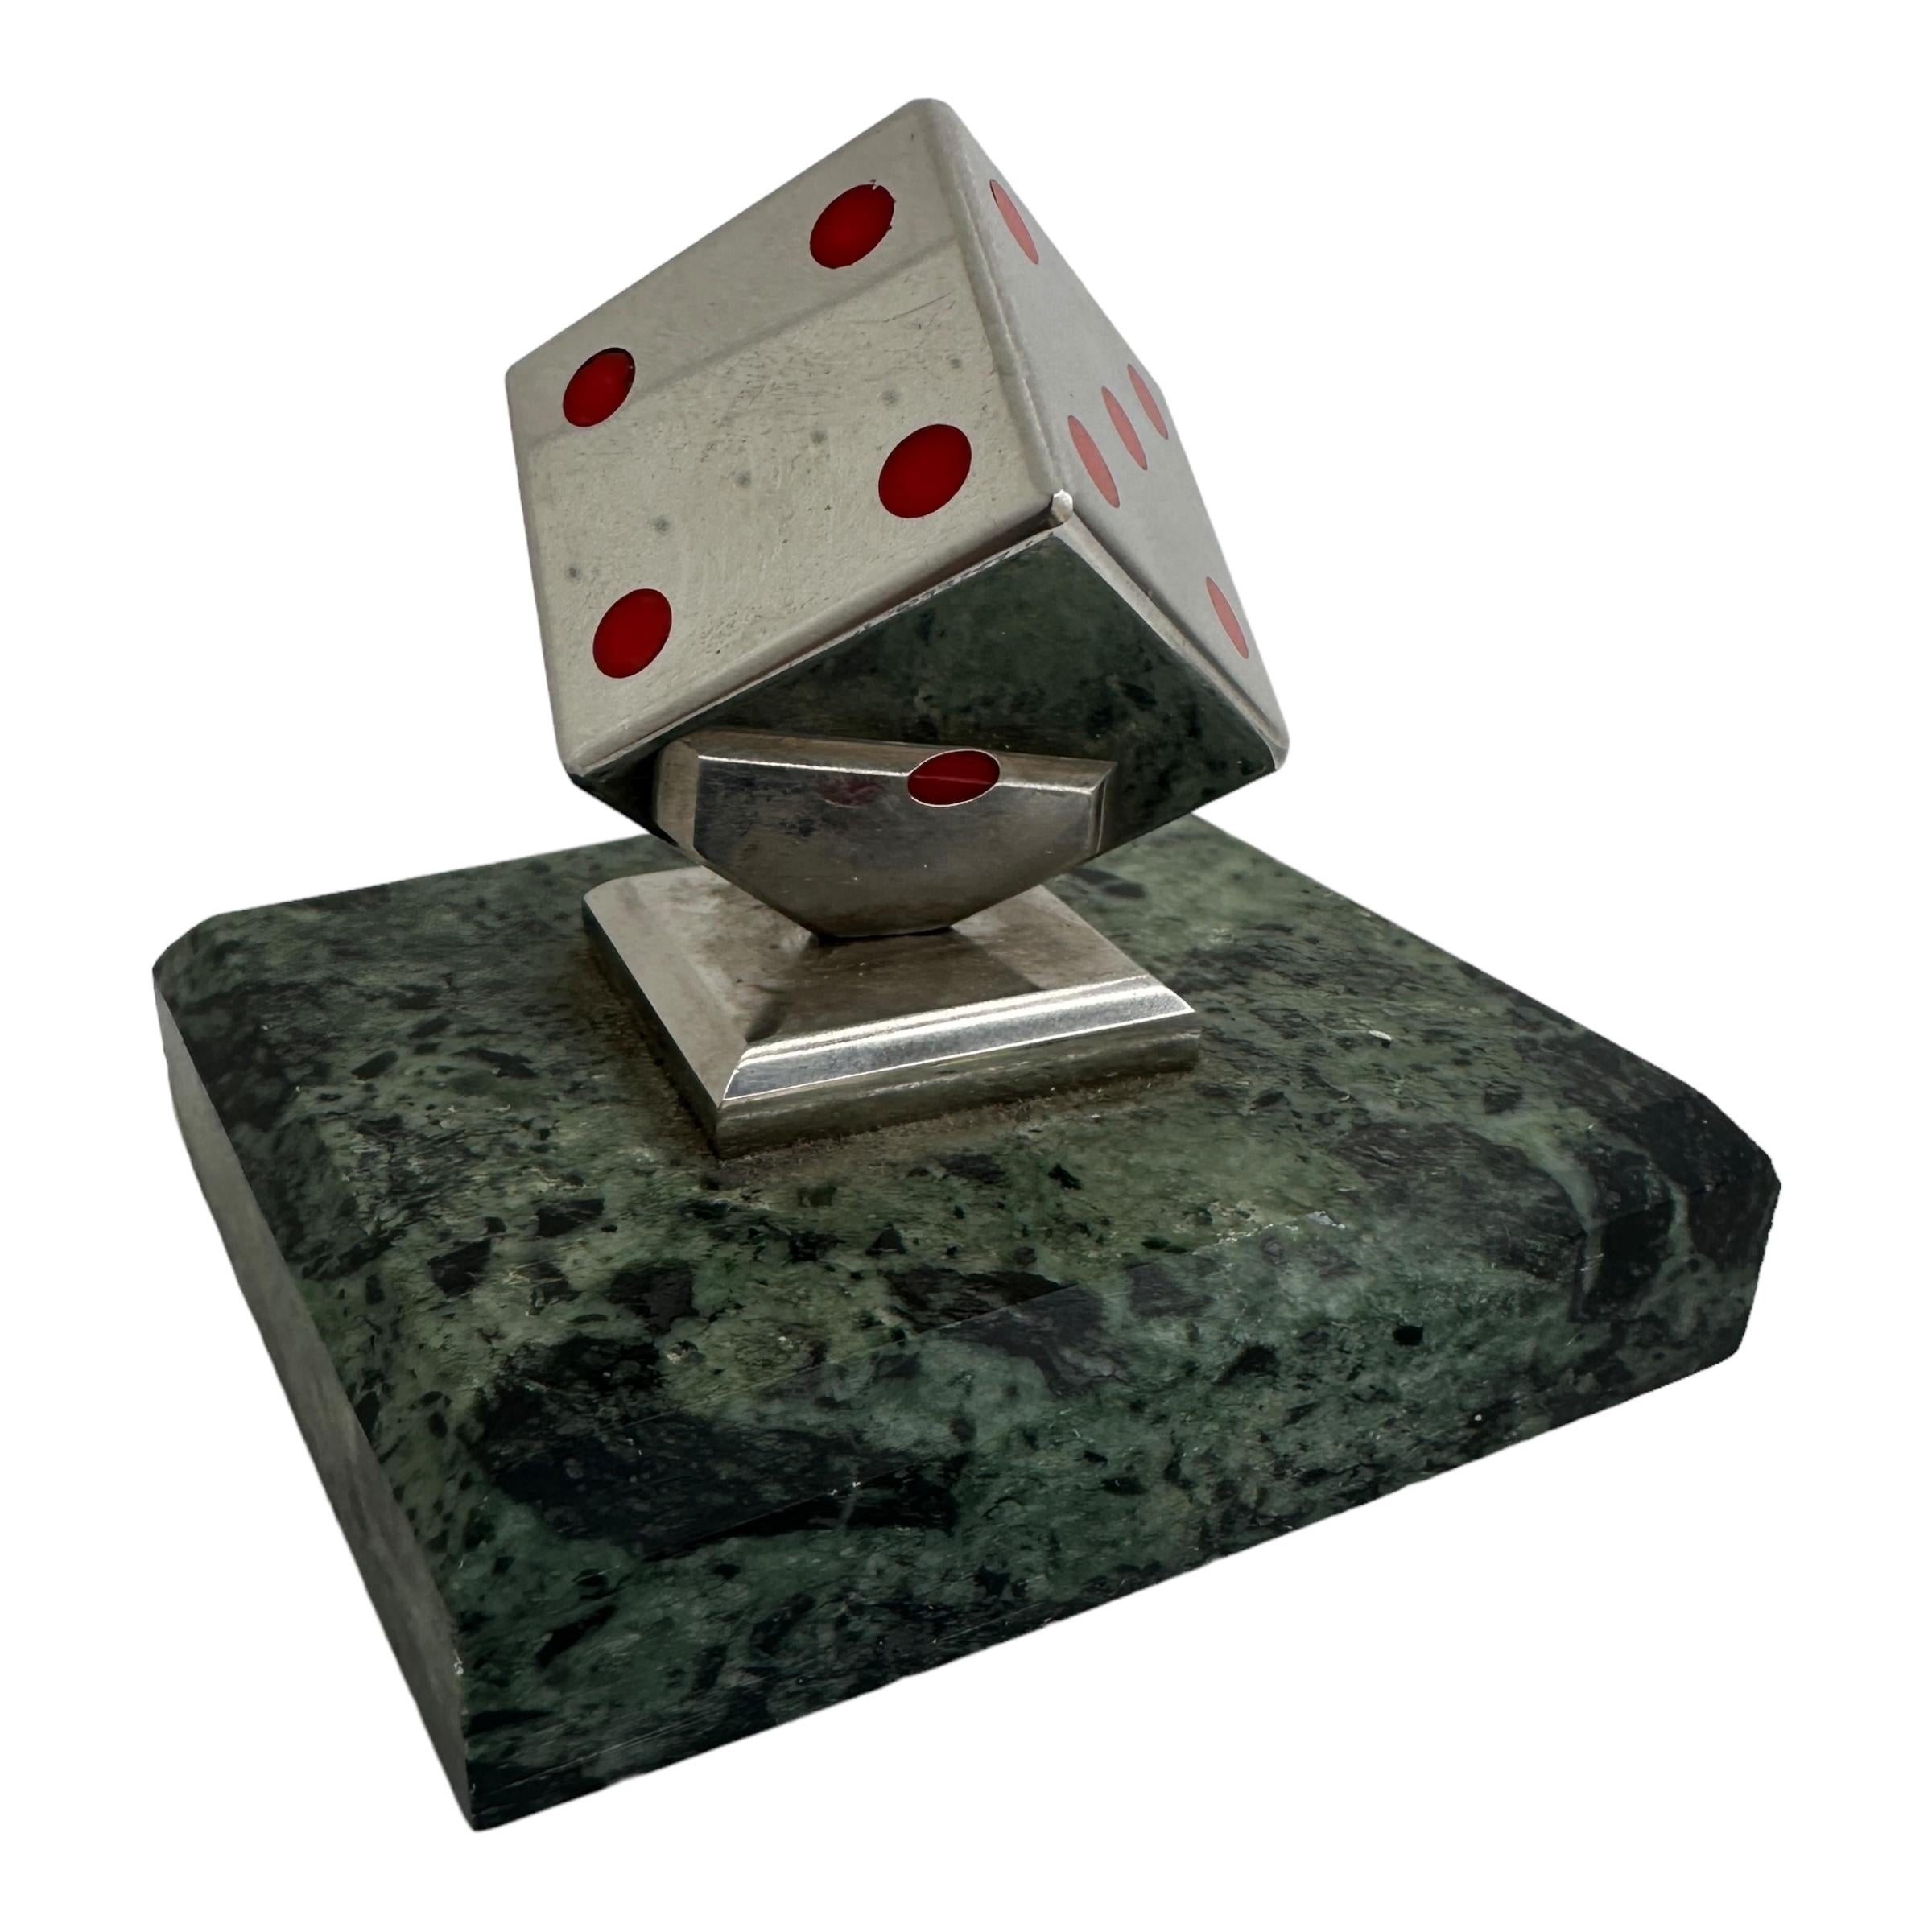 Dice Metal Statue on Marble Base Paper Weight Mid-Century Modern, German, 1970s For Sale 5